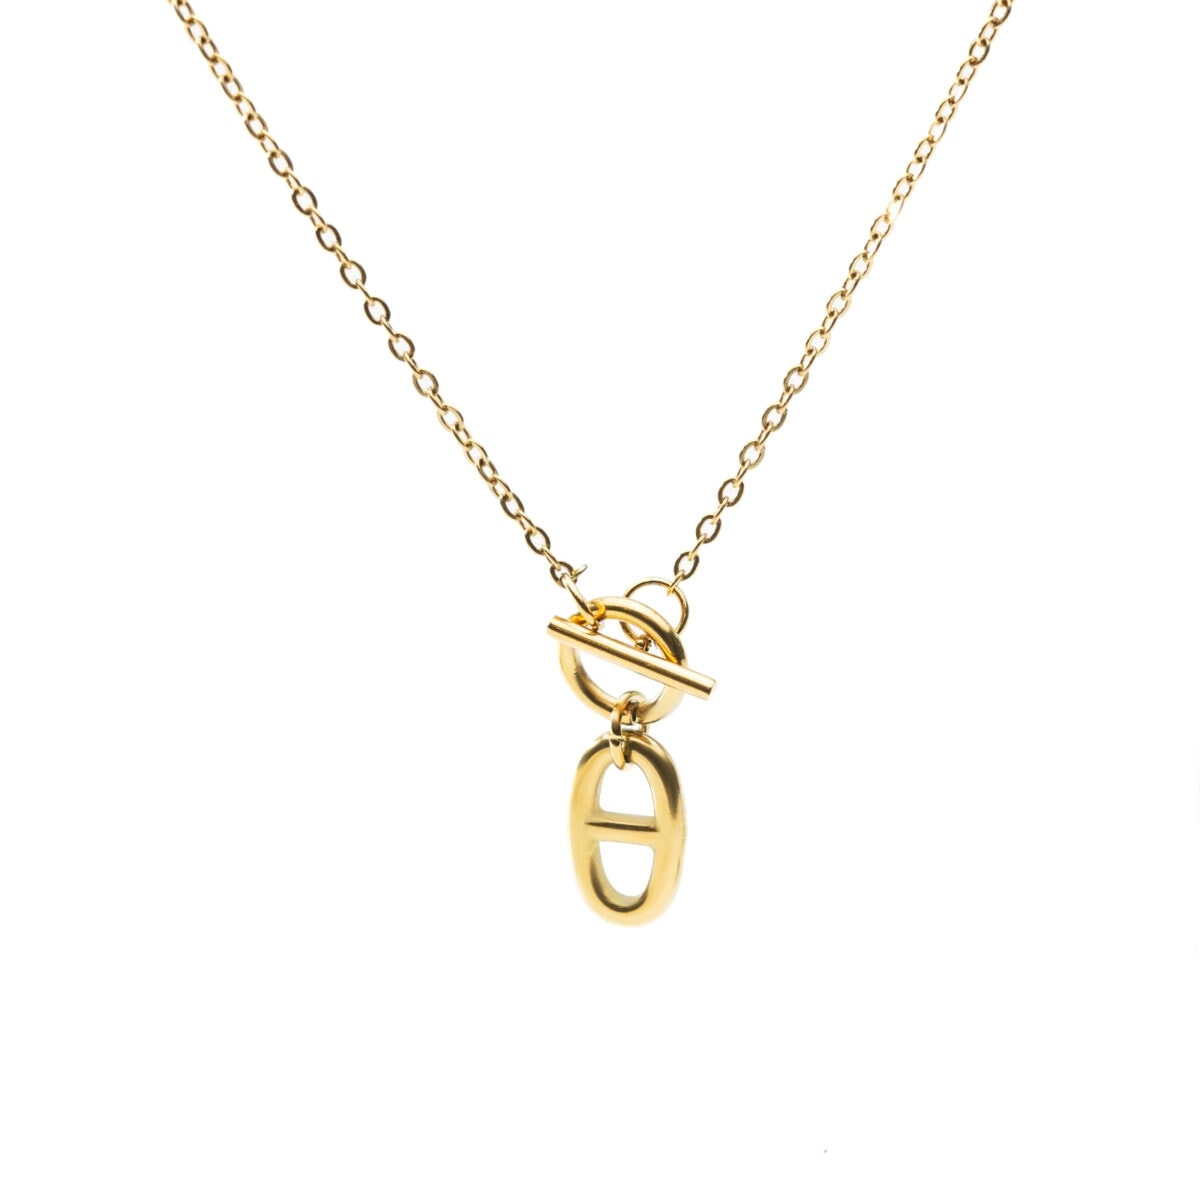 https://m.clubbella.co/product/classic-toggle-gold-necklace/ Classic Toggle Gold Necklace